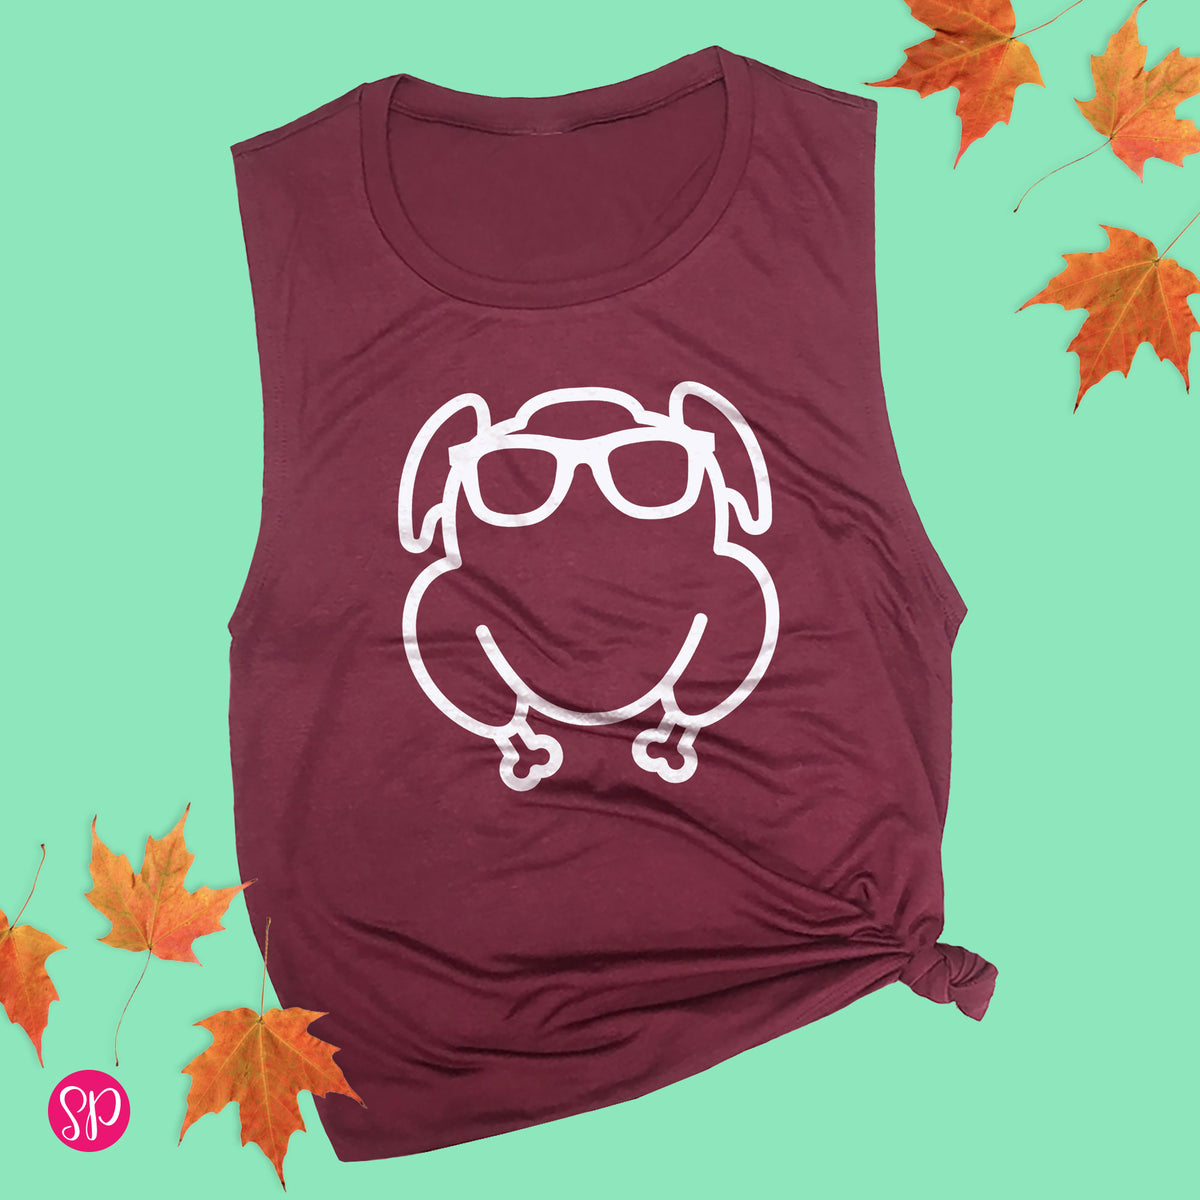 Turkey With Sunglasses Friends Friendsgiving Thanksgiving Turkey Trot Day Fitness Workout Muscle Tank Tee Shirt